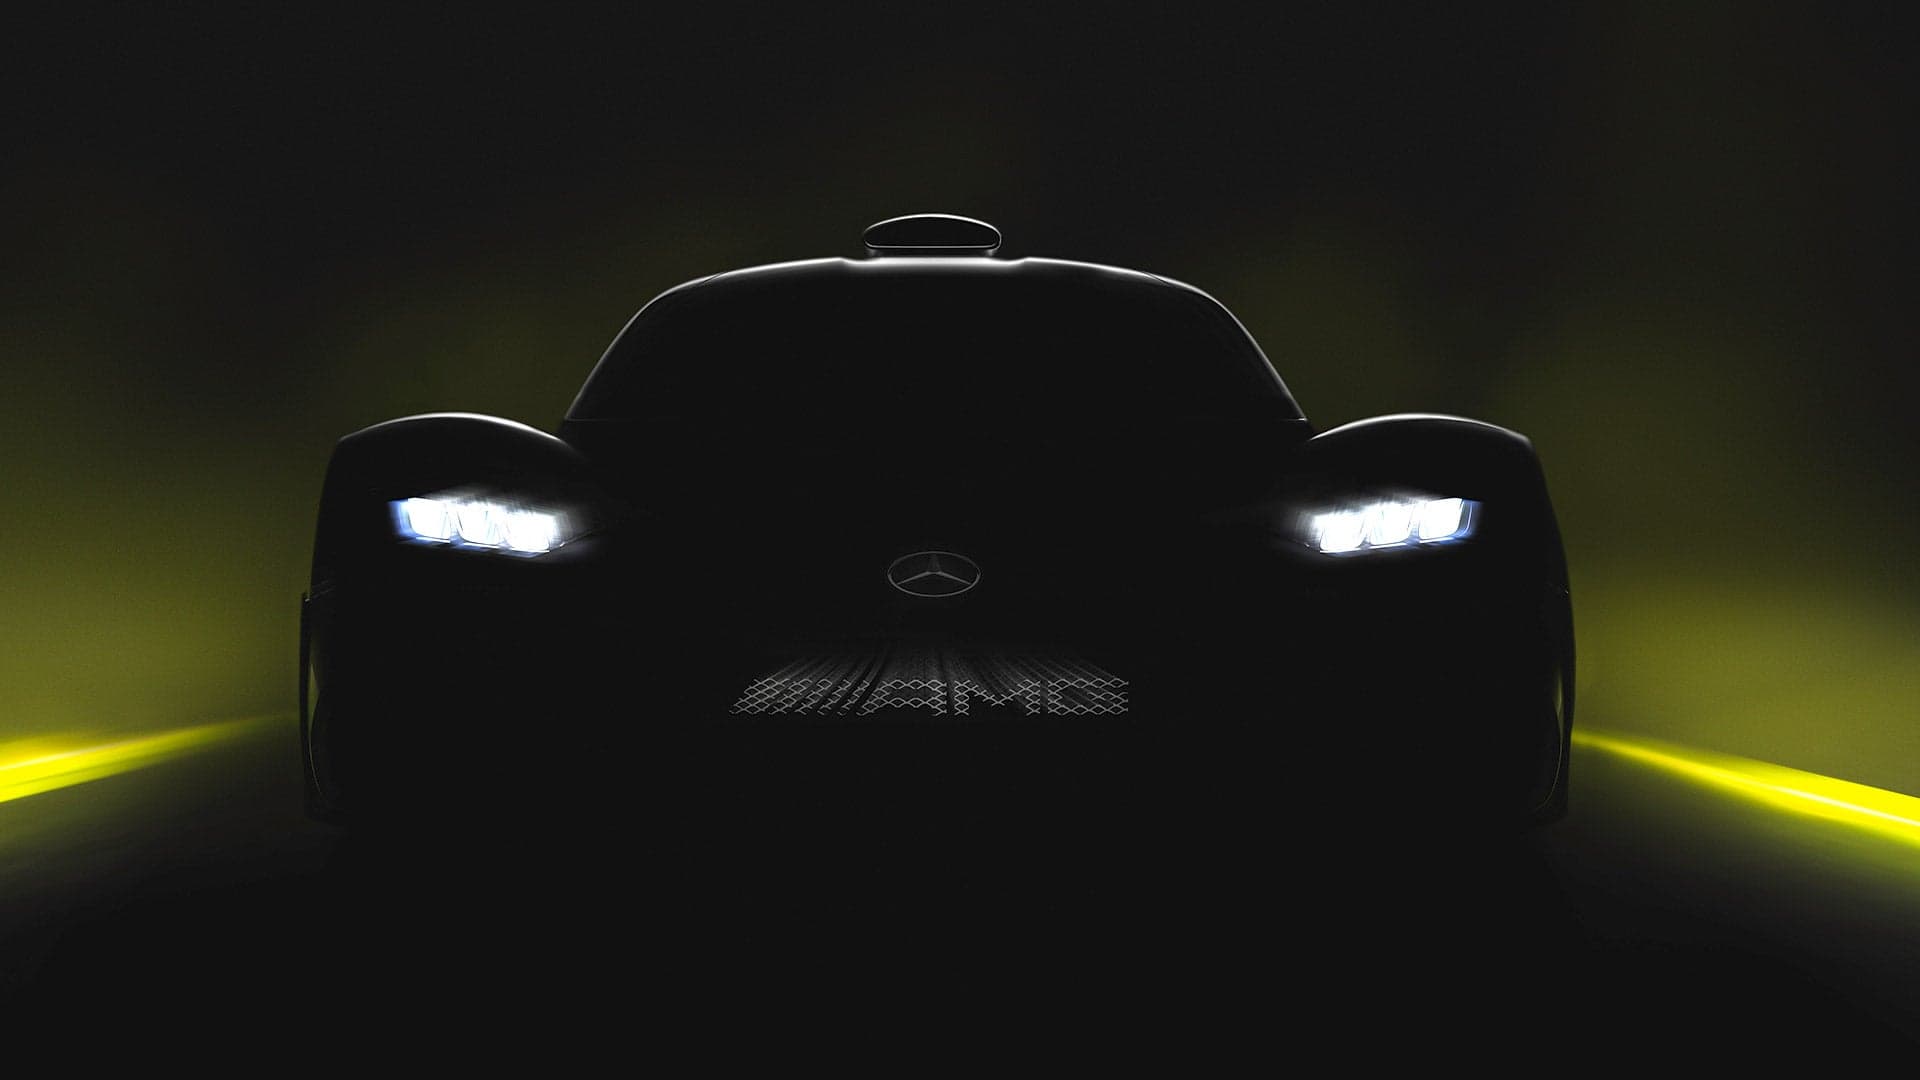 Behold the Face of Mercedes-AMG’s 218-MPH Project One Hypercar